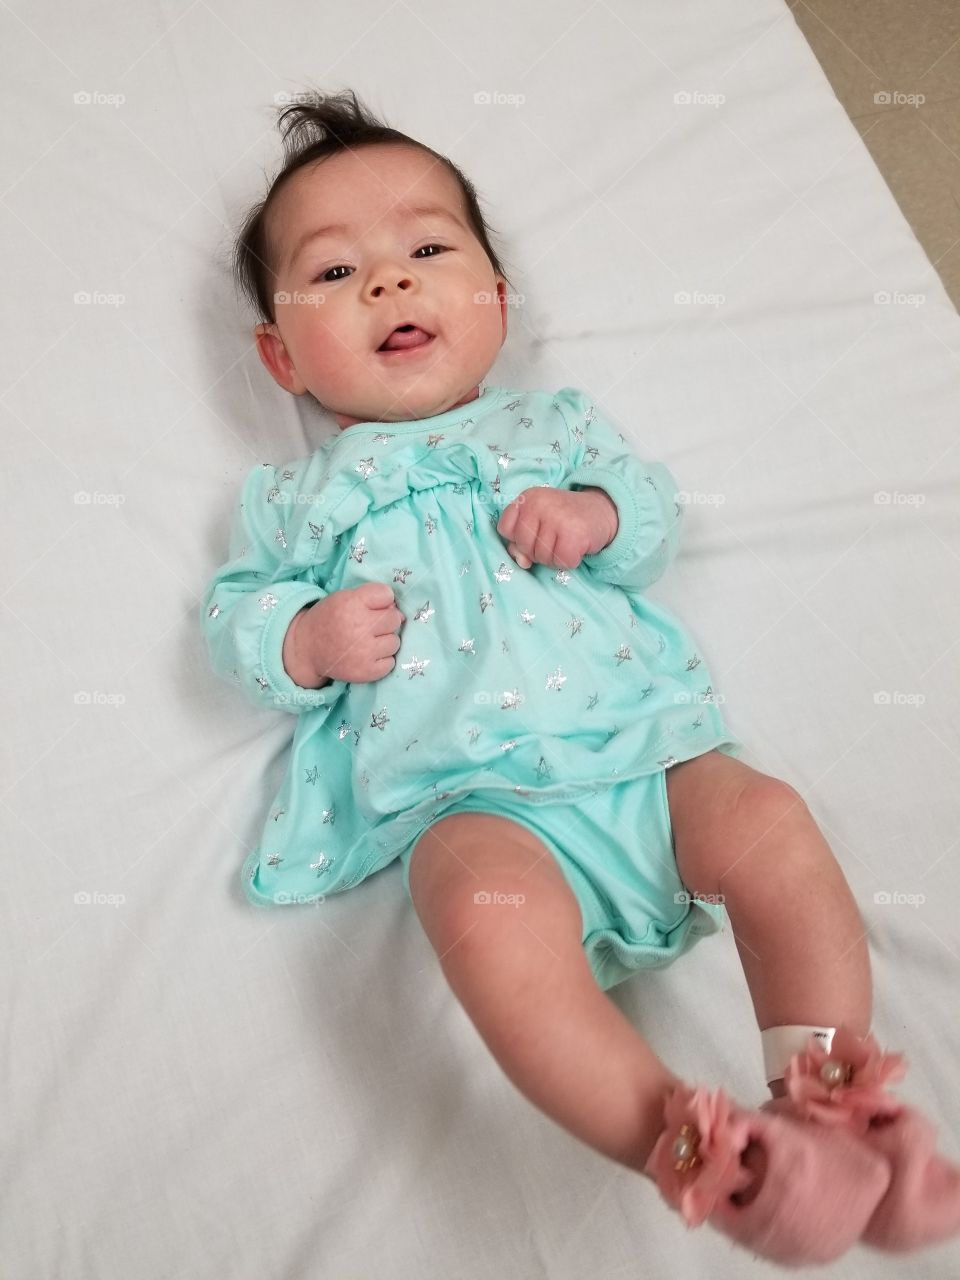 Baby Isabella at the hospital in blue dress